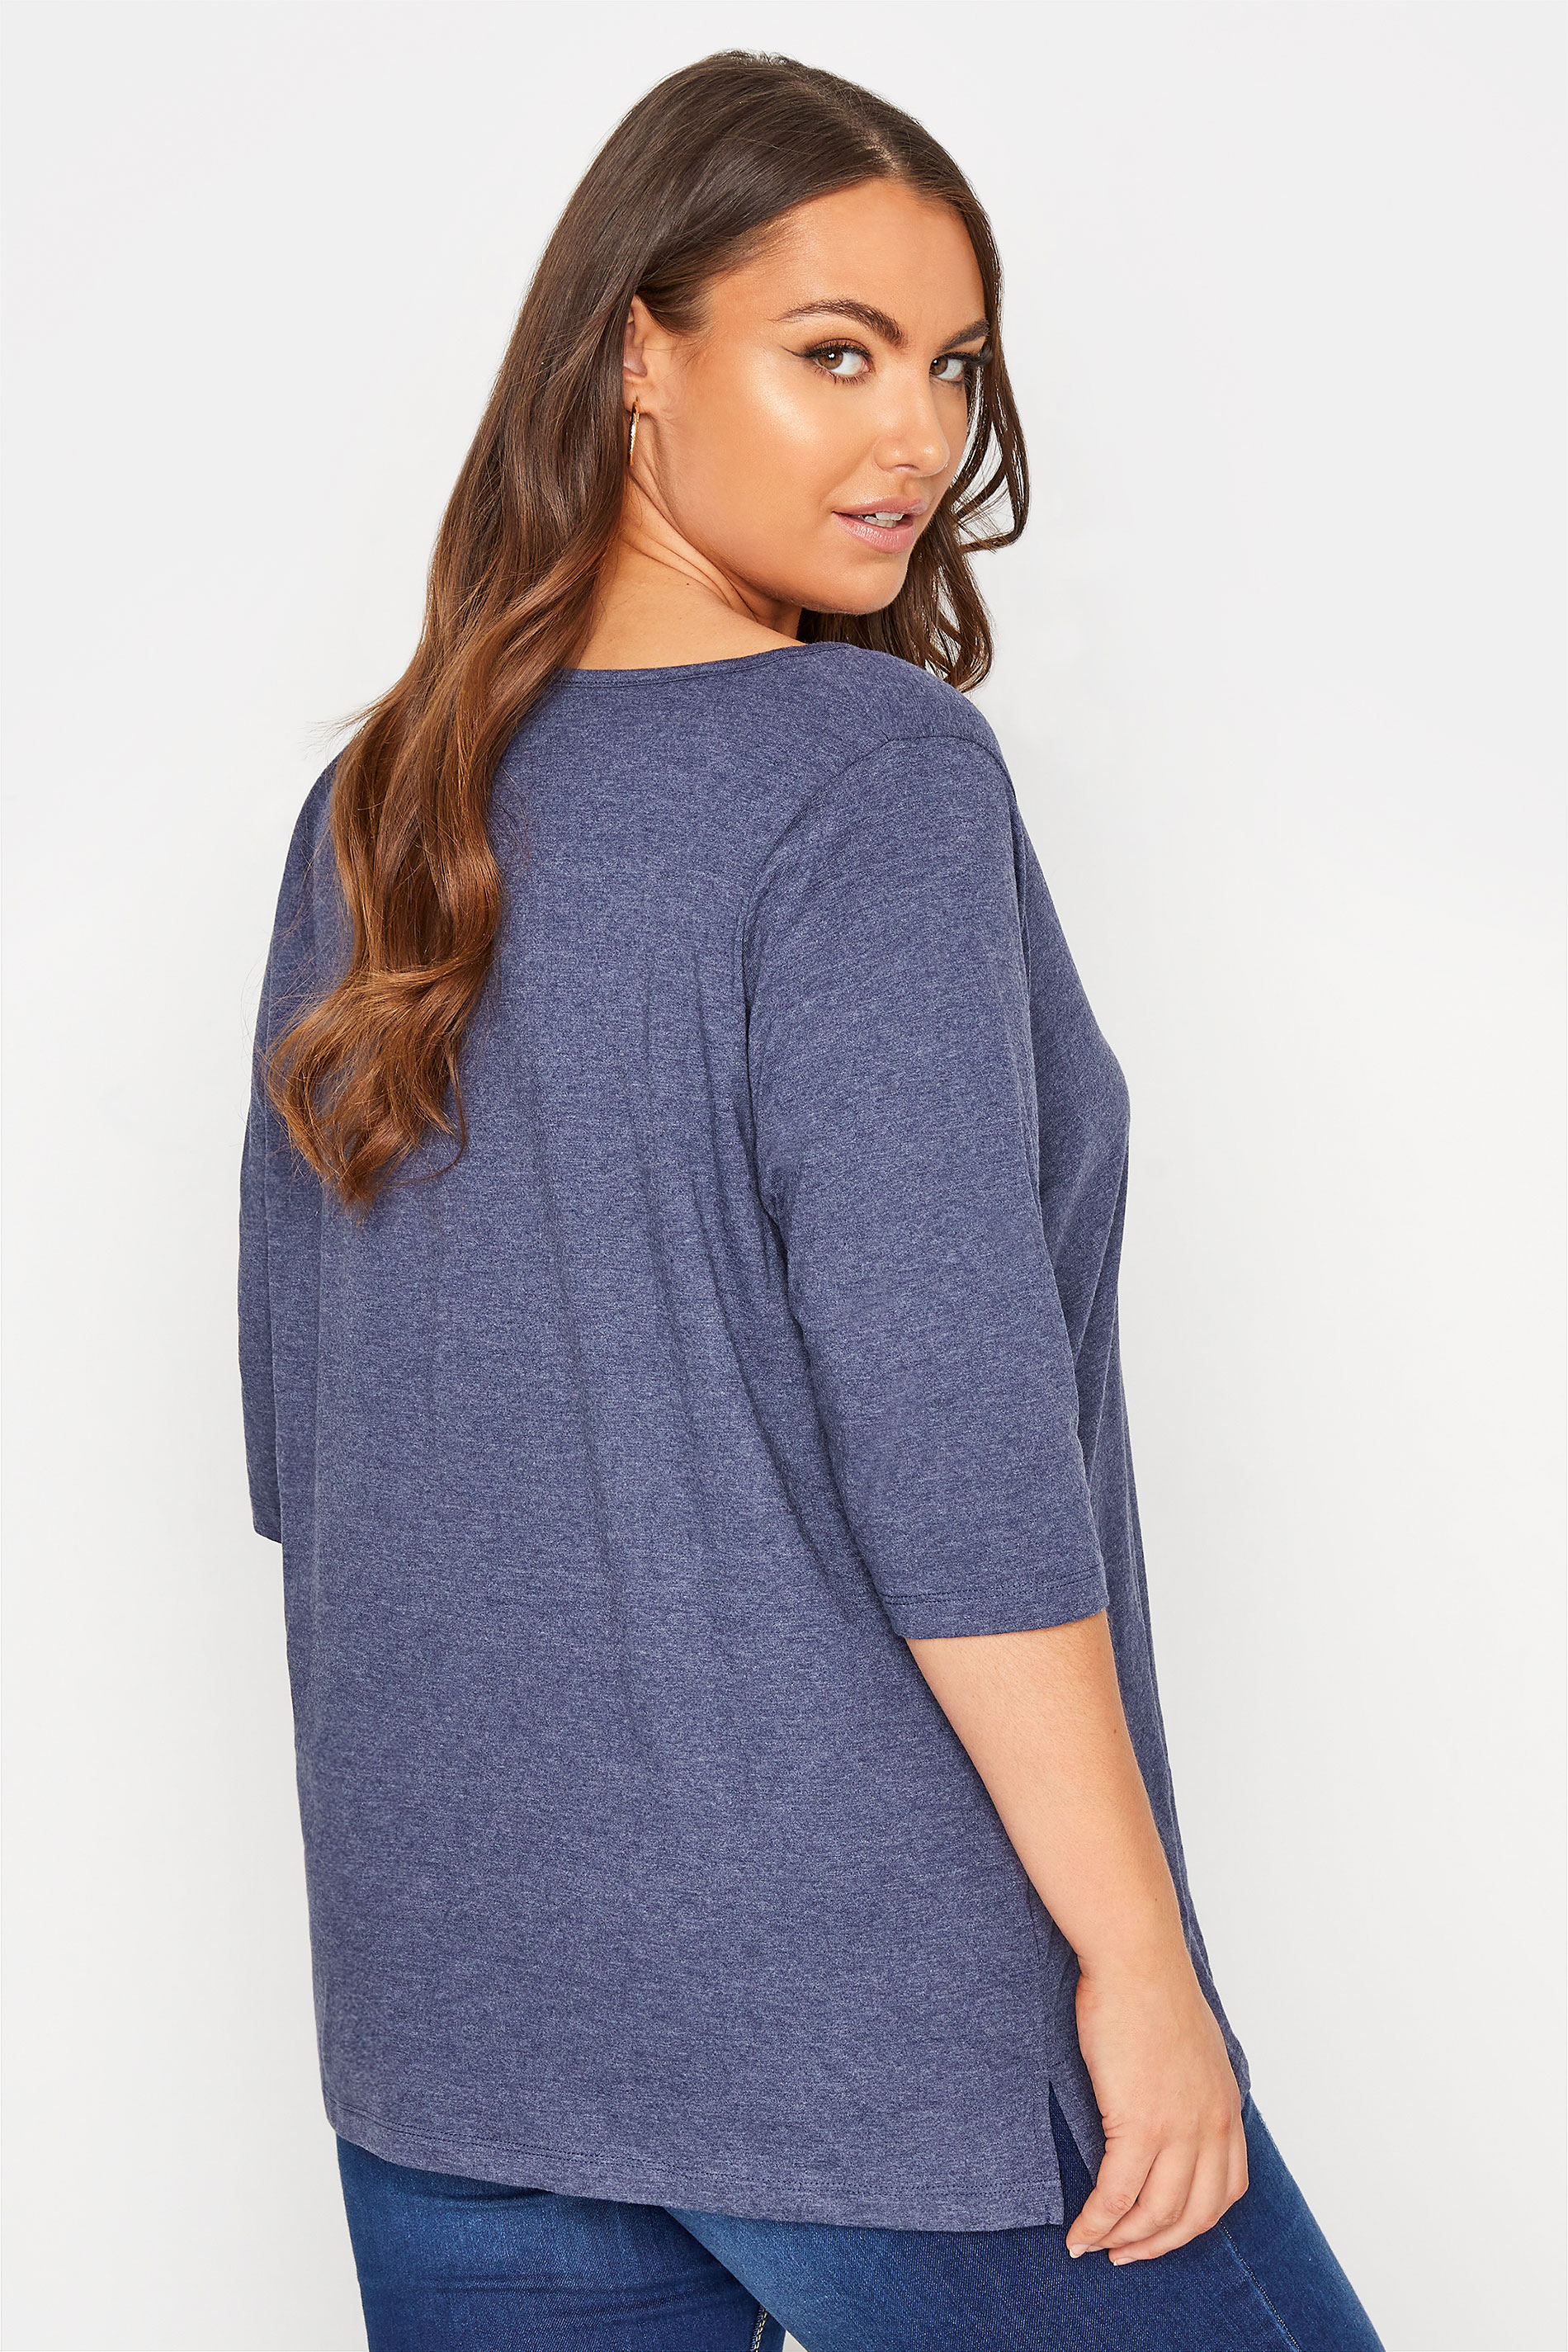 Grande taille  Tops Grande taille  T-Shirts | T-Shirt Bleu Col V Manches Longues - LG71026